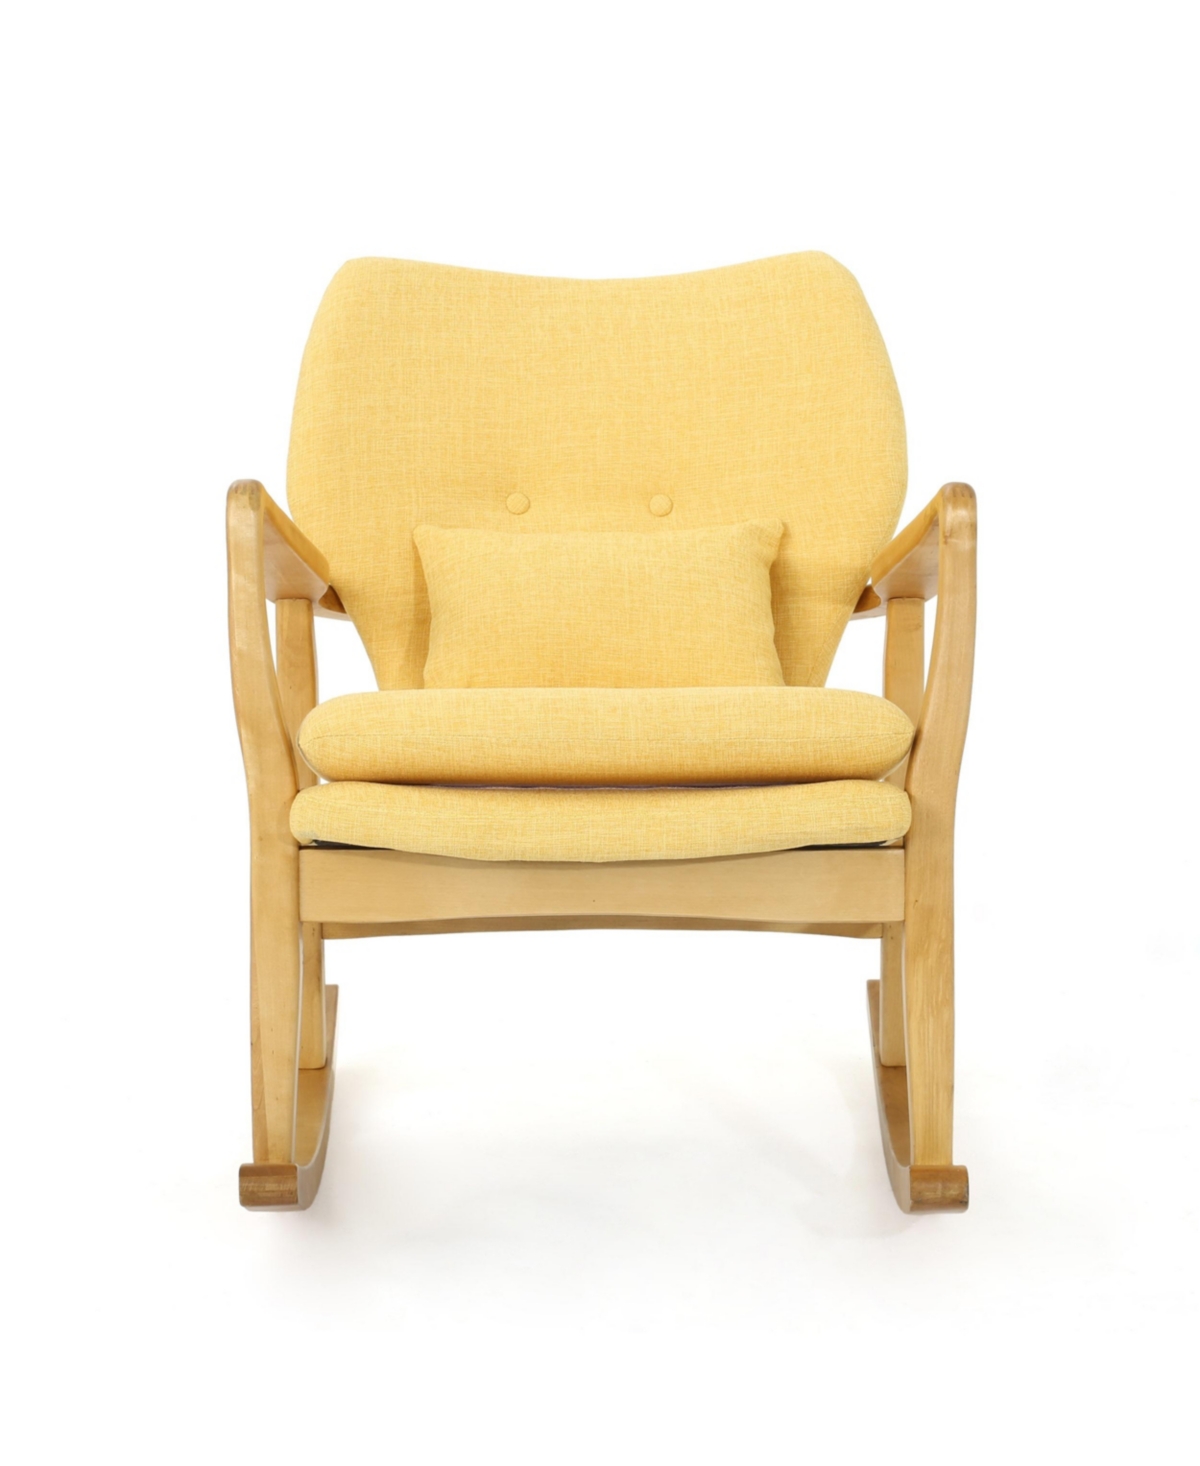 Noble House Benny Mid-century Modern Tufted Rocking Chair With Accent Pillow In Muted Yellow